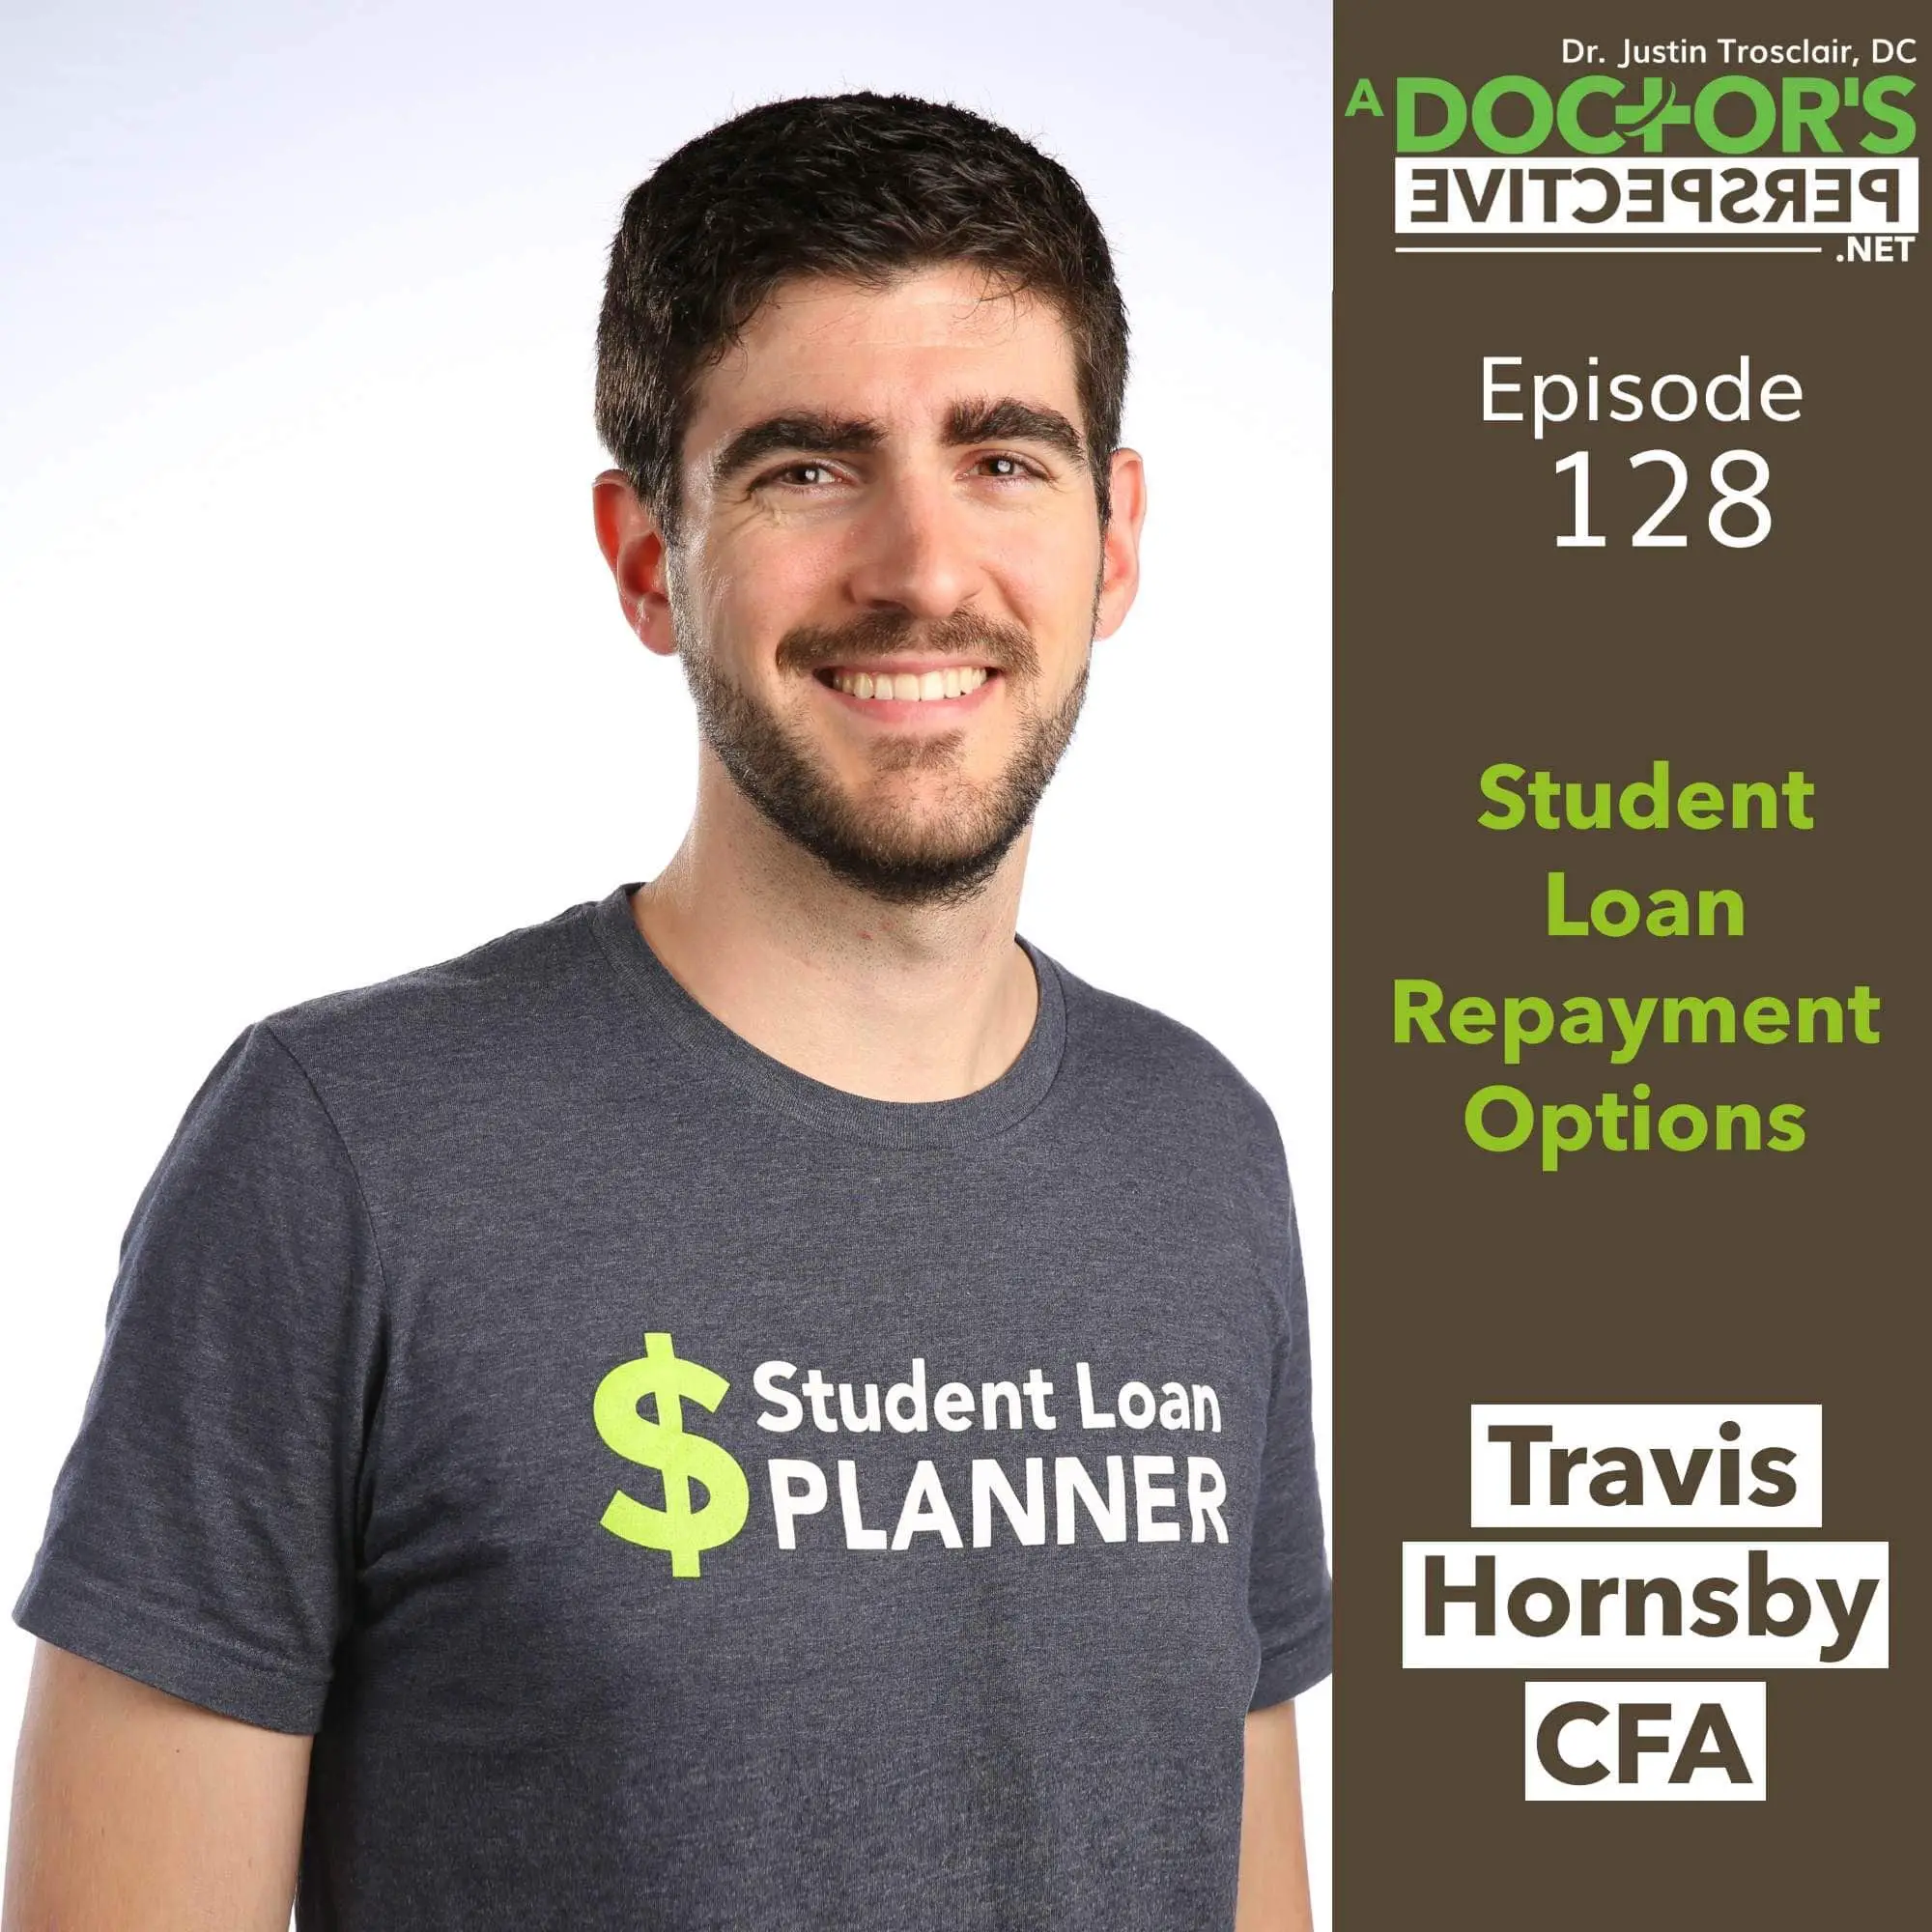 E 128 Student Loan Repayment Options Travis Hornsby CFA